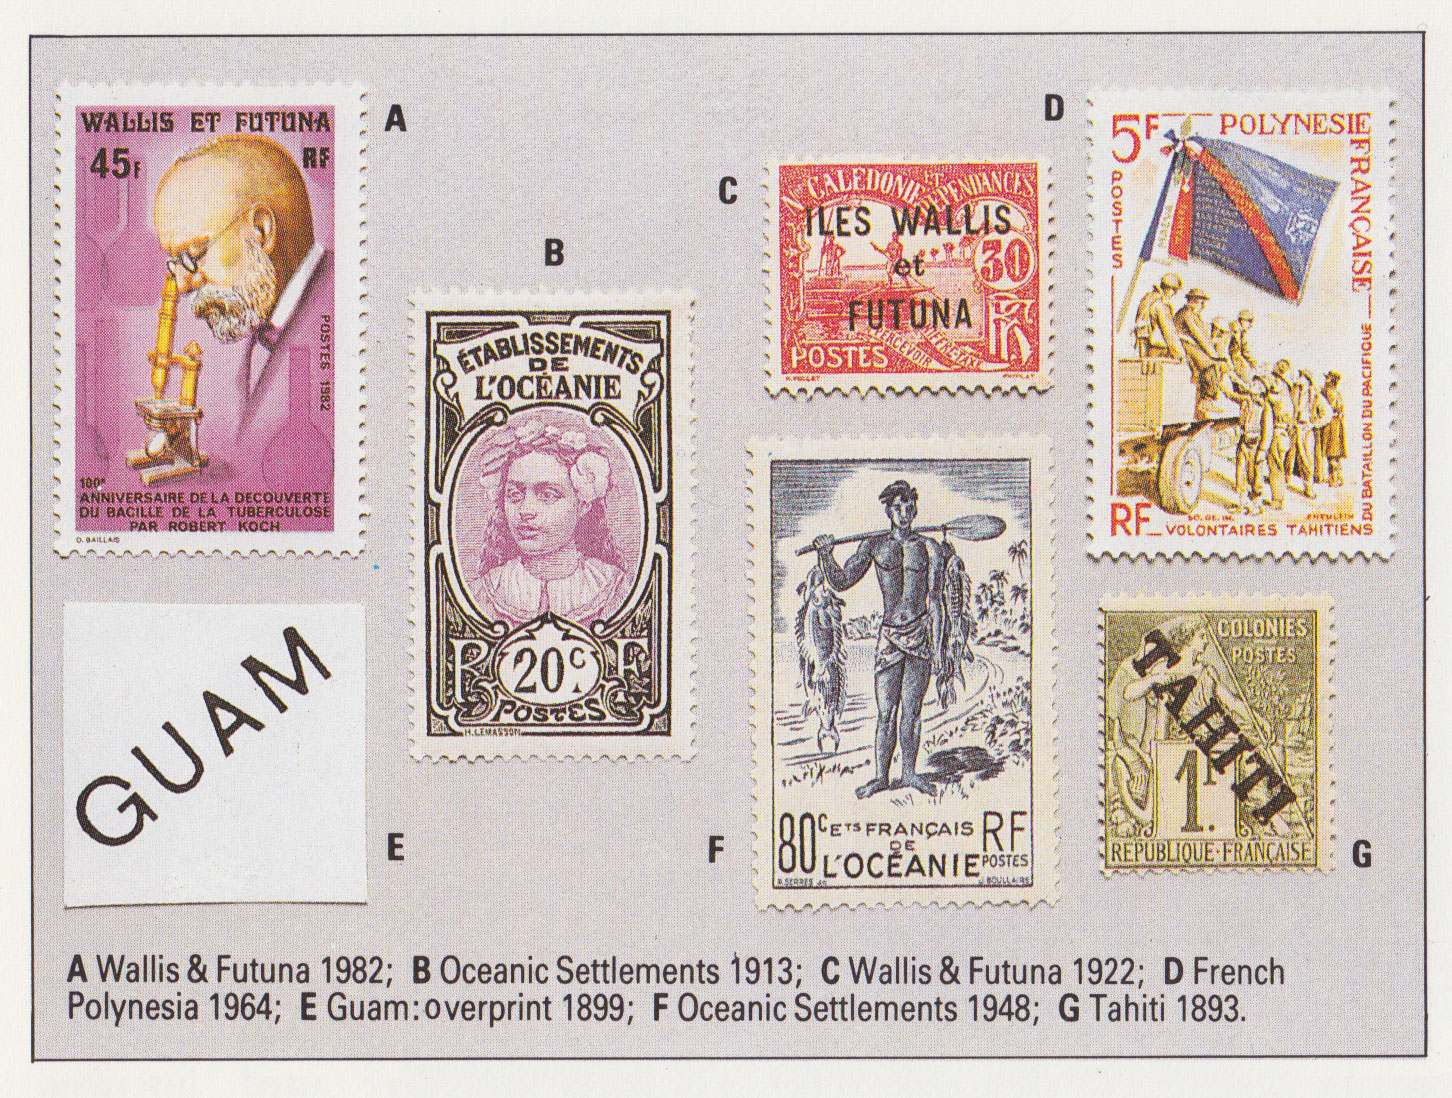 Guam and French Polynesian stamps